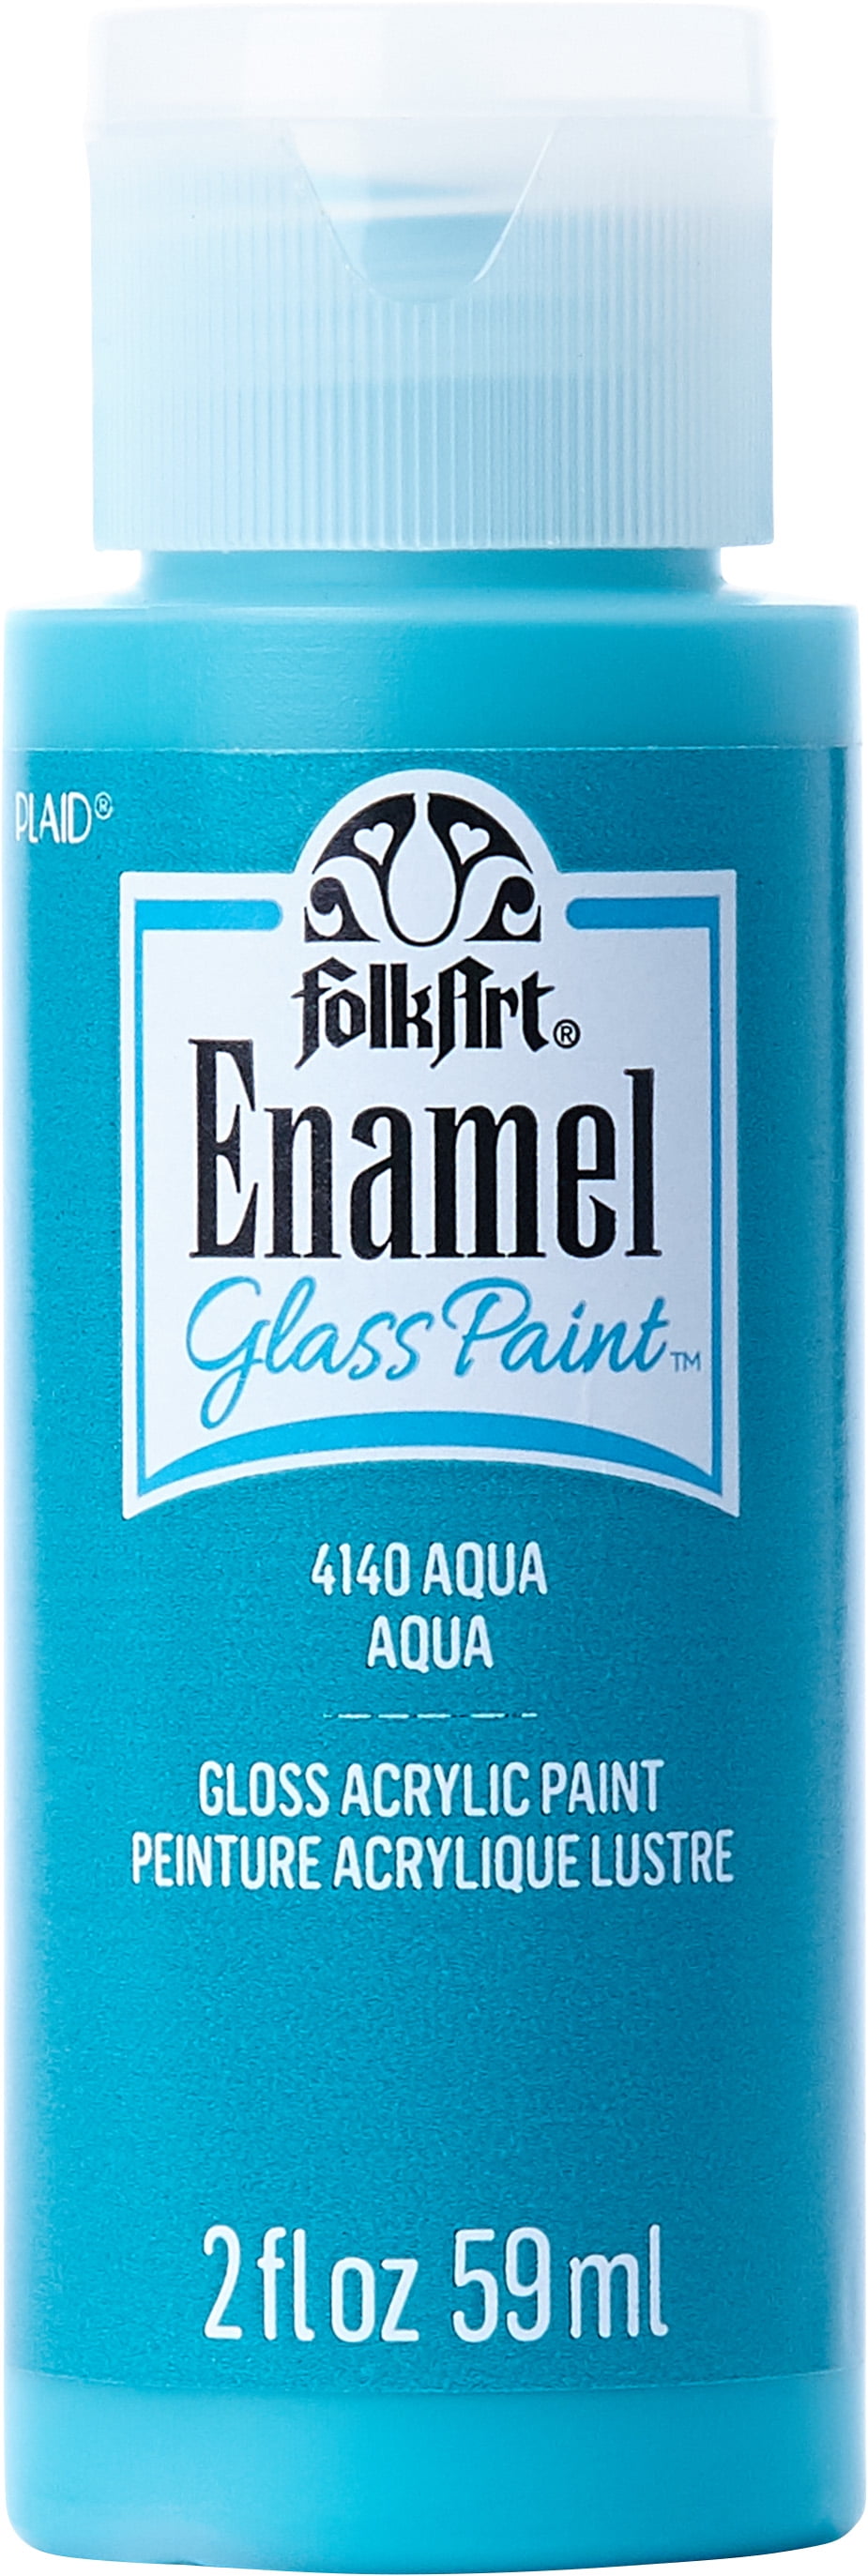 FolkArt Enamel Acrylic Craft Paint, Pearl White 2 fl oz Premium Matte  Finish Paint, Perfect For Easy To Apply DIY Arts And Crafts, 11946